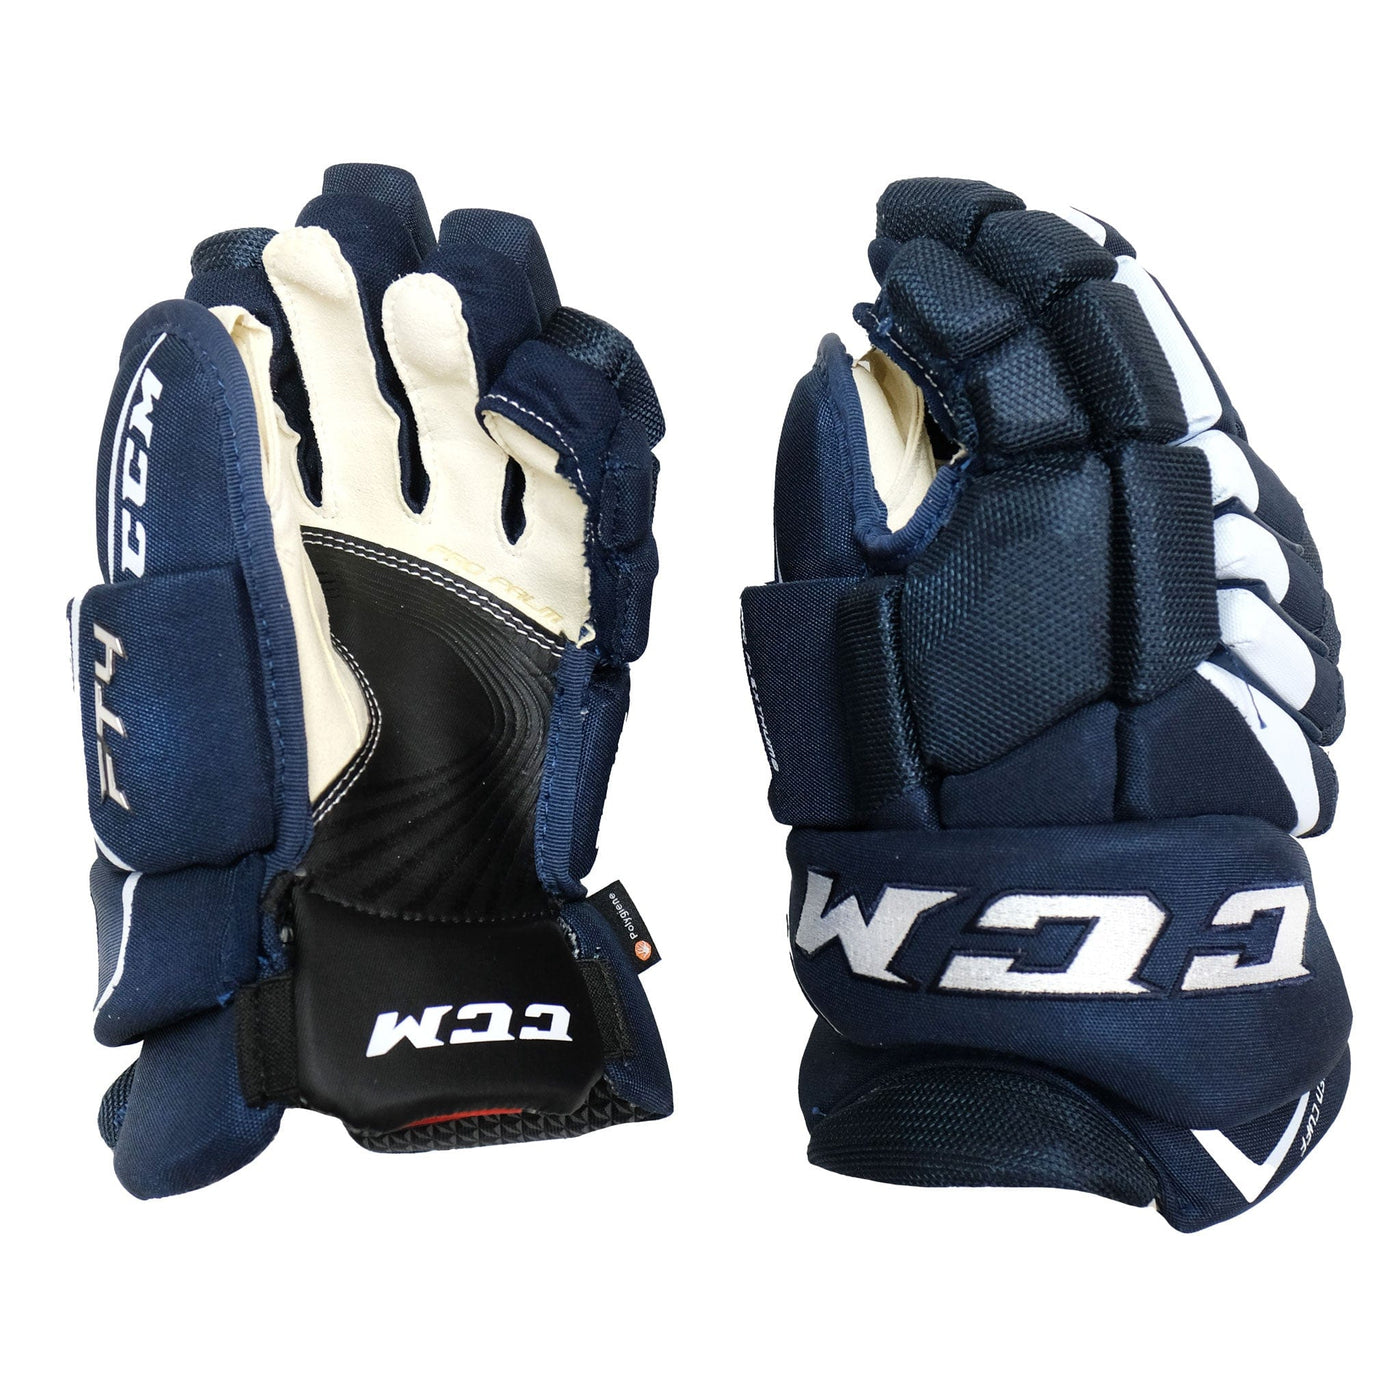 CCM Jetspeed FT4 Junior Hockey Gloves - The Hockey Shop Source For Sports